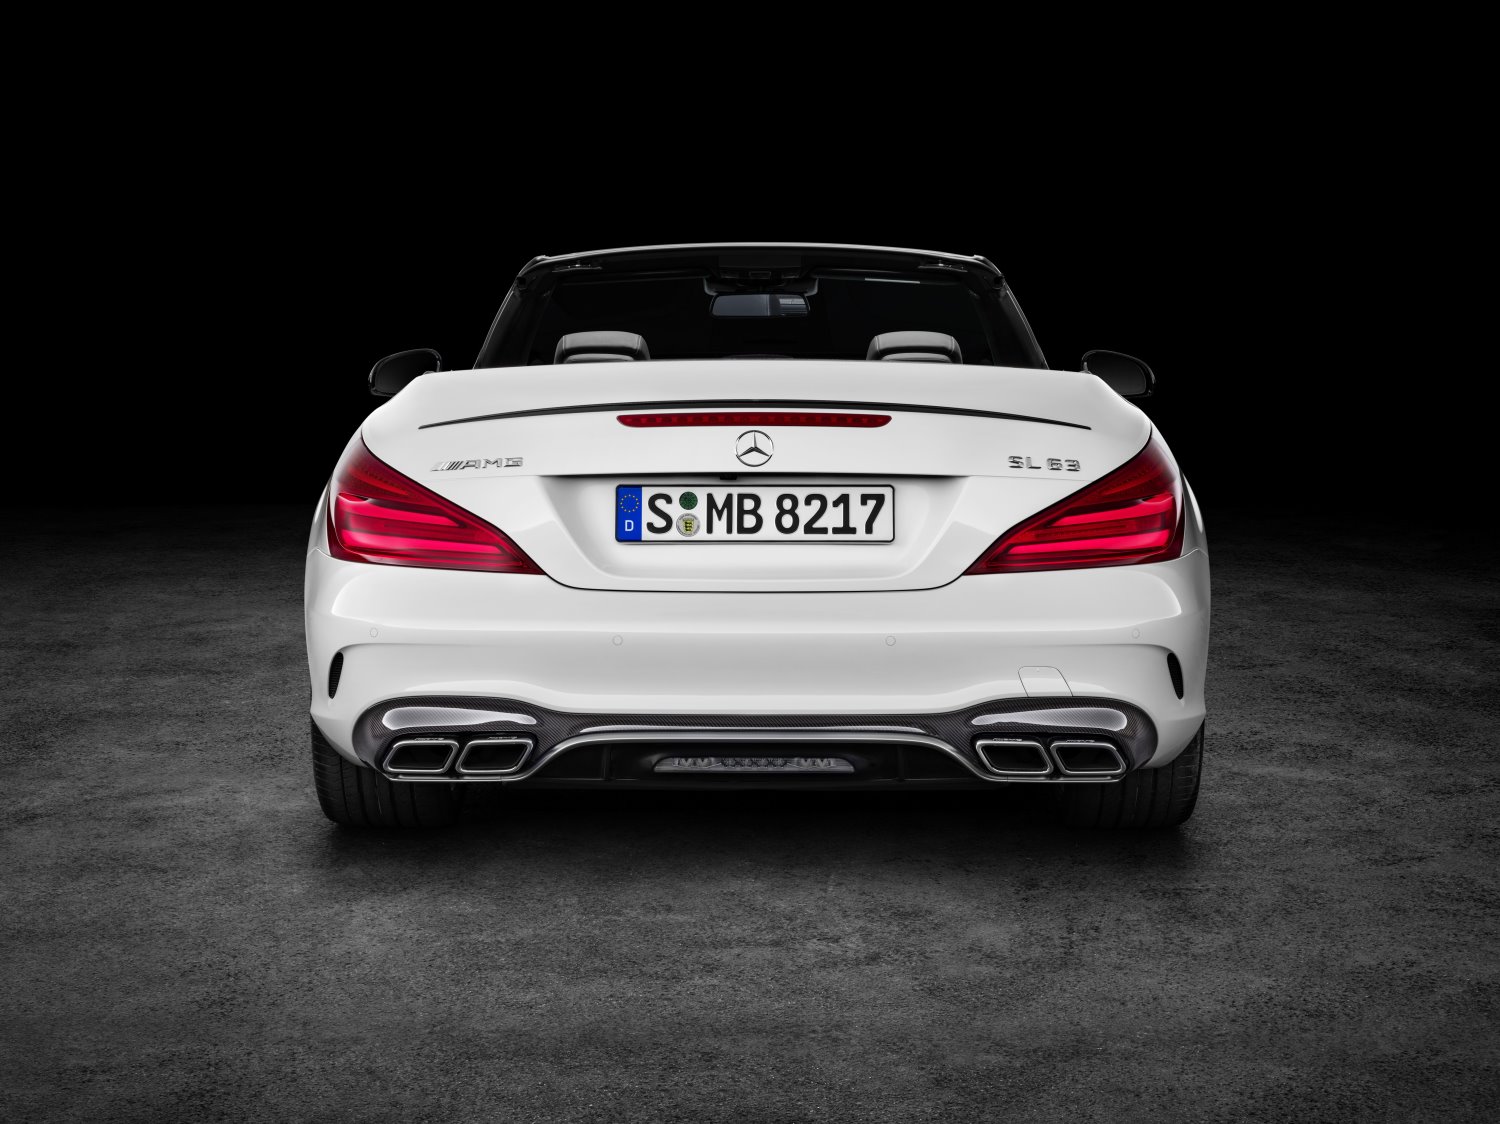 Back of the SL 63